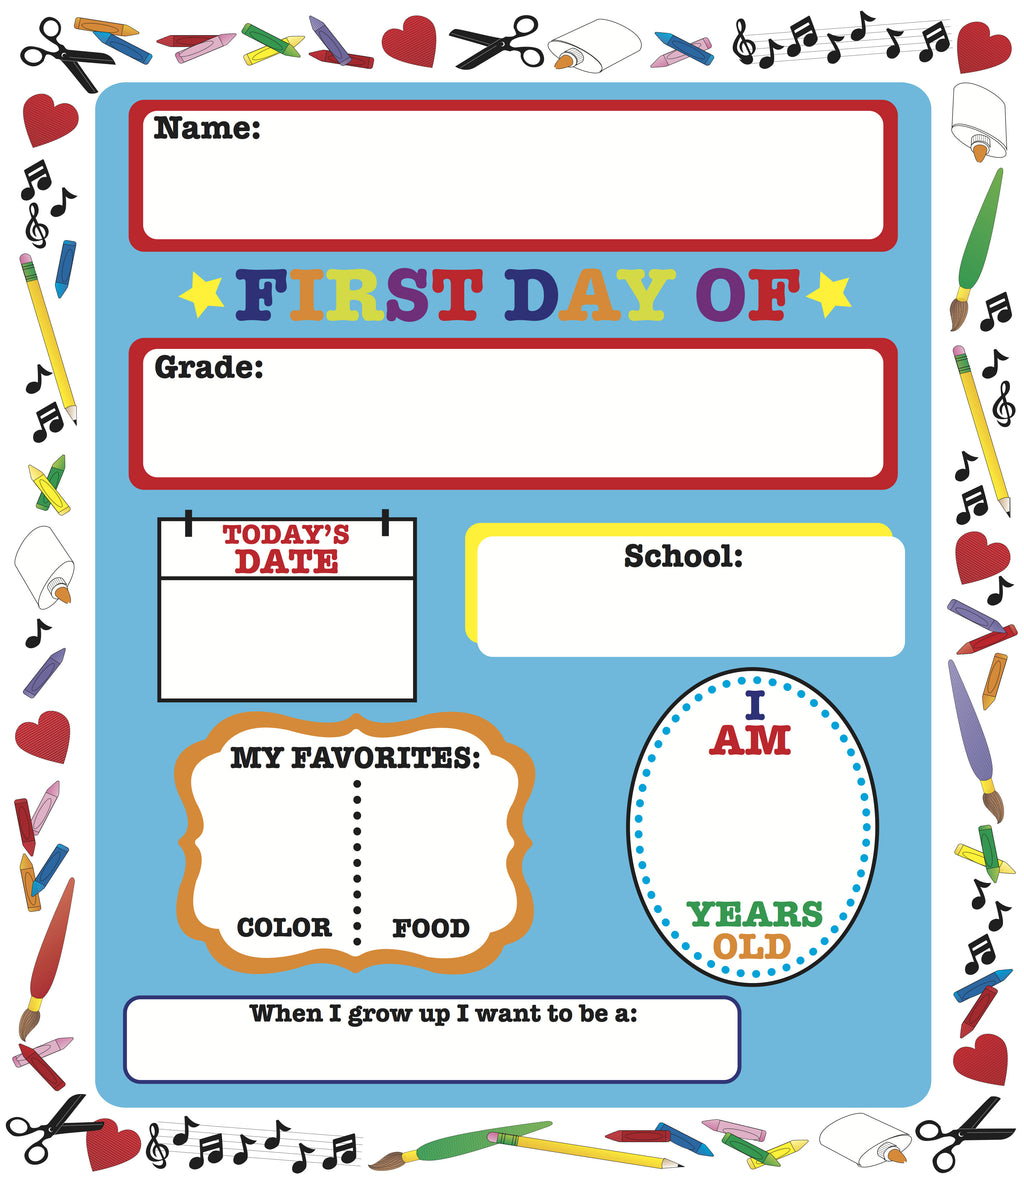 First Day of School Announcement - Creative Shapes Etc.